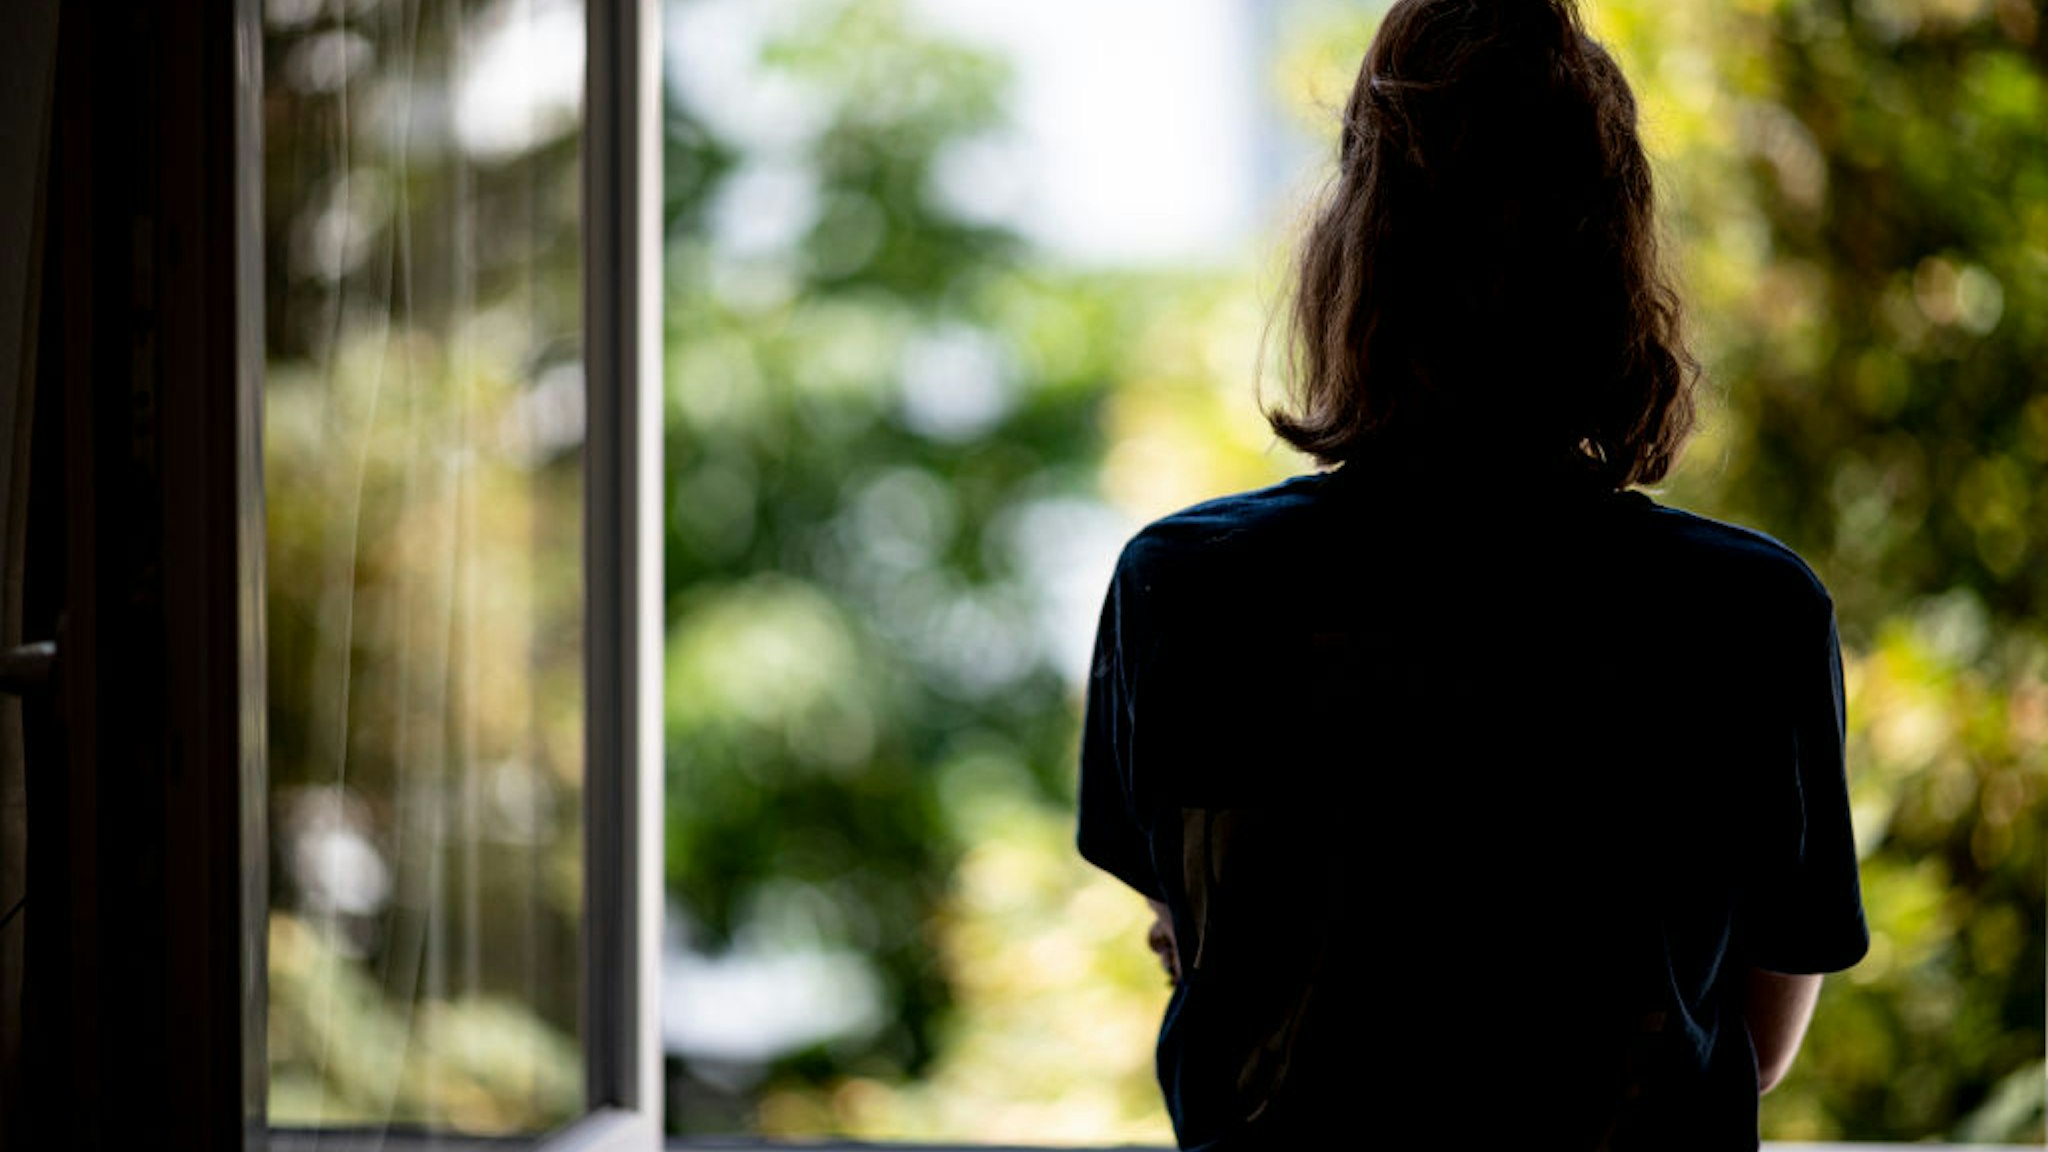 PRODUCTION - 13 July 2021, Berlin: ILLUSTRATION - A woman stands at a window in her apartment. (posed scene - to dpa: "Freedom before the next wave? Why some miss the lockdown") Photo: Fabian Sommer/dpa (Photo by Fabian Sommer/picture alliance via Getty Images)